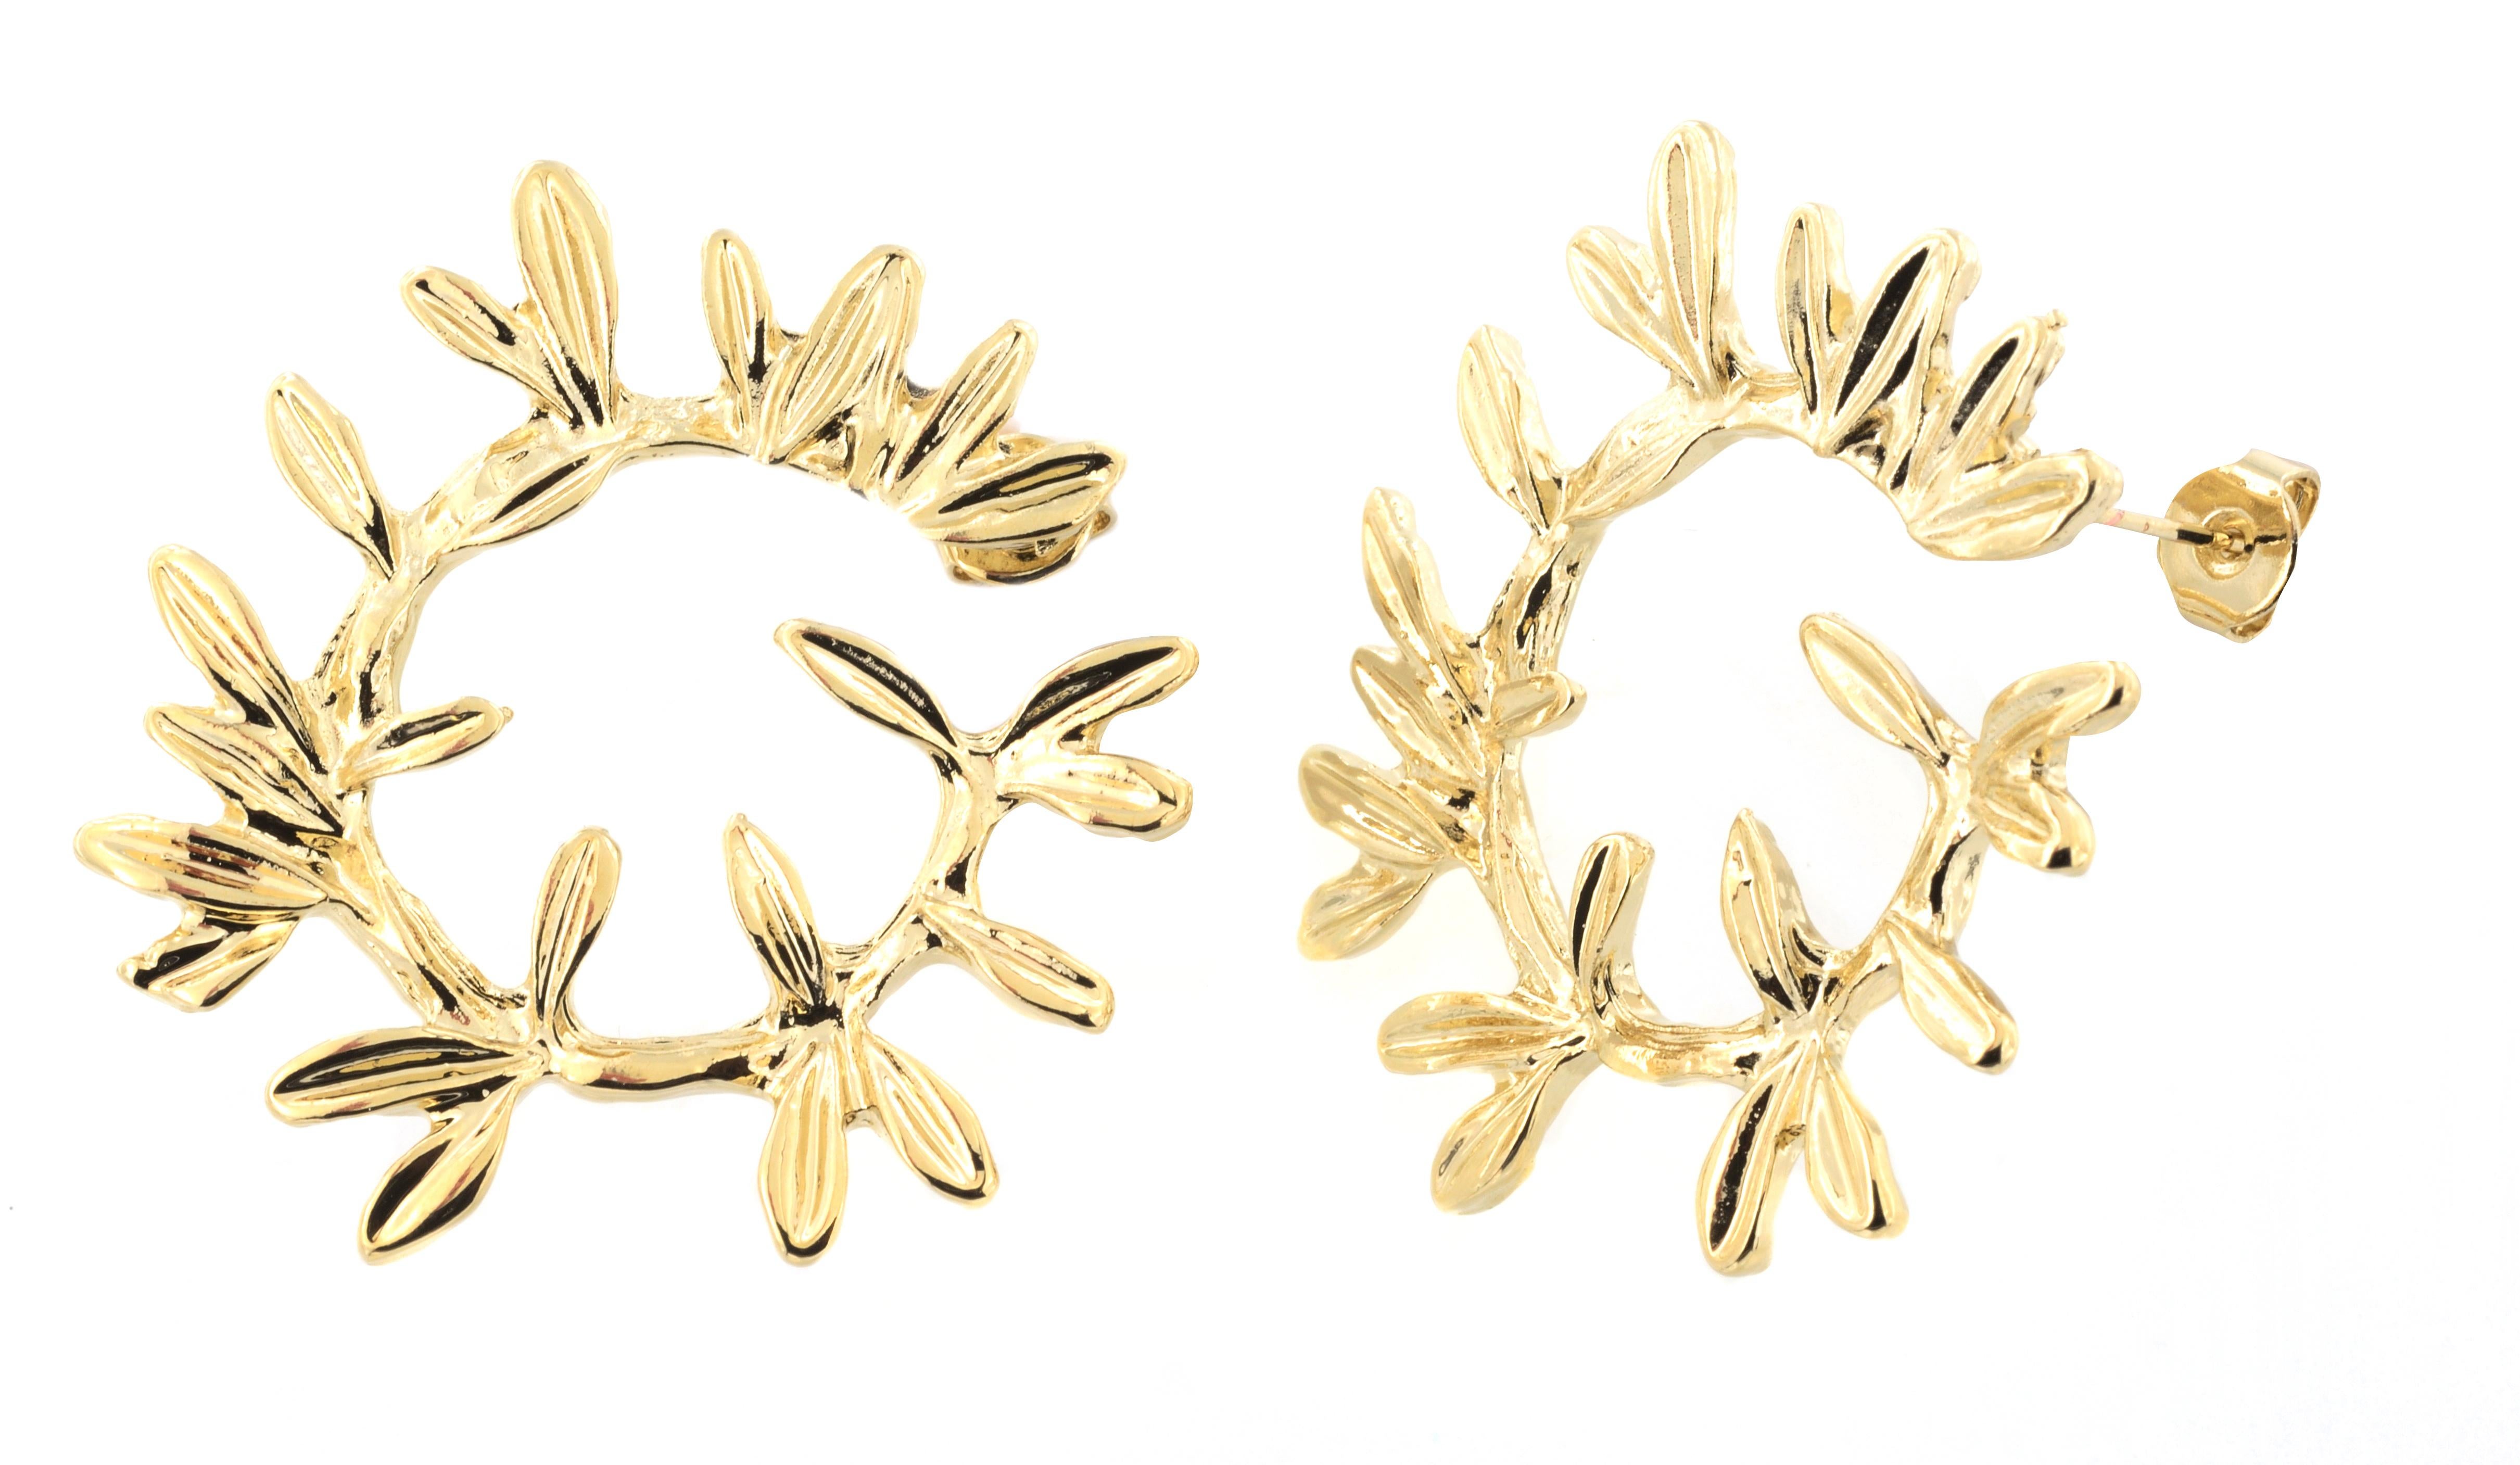 18kt gold plated earrings 
Hypoallergenic and Nikel free metal